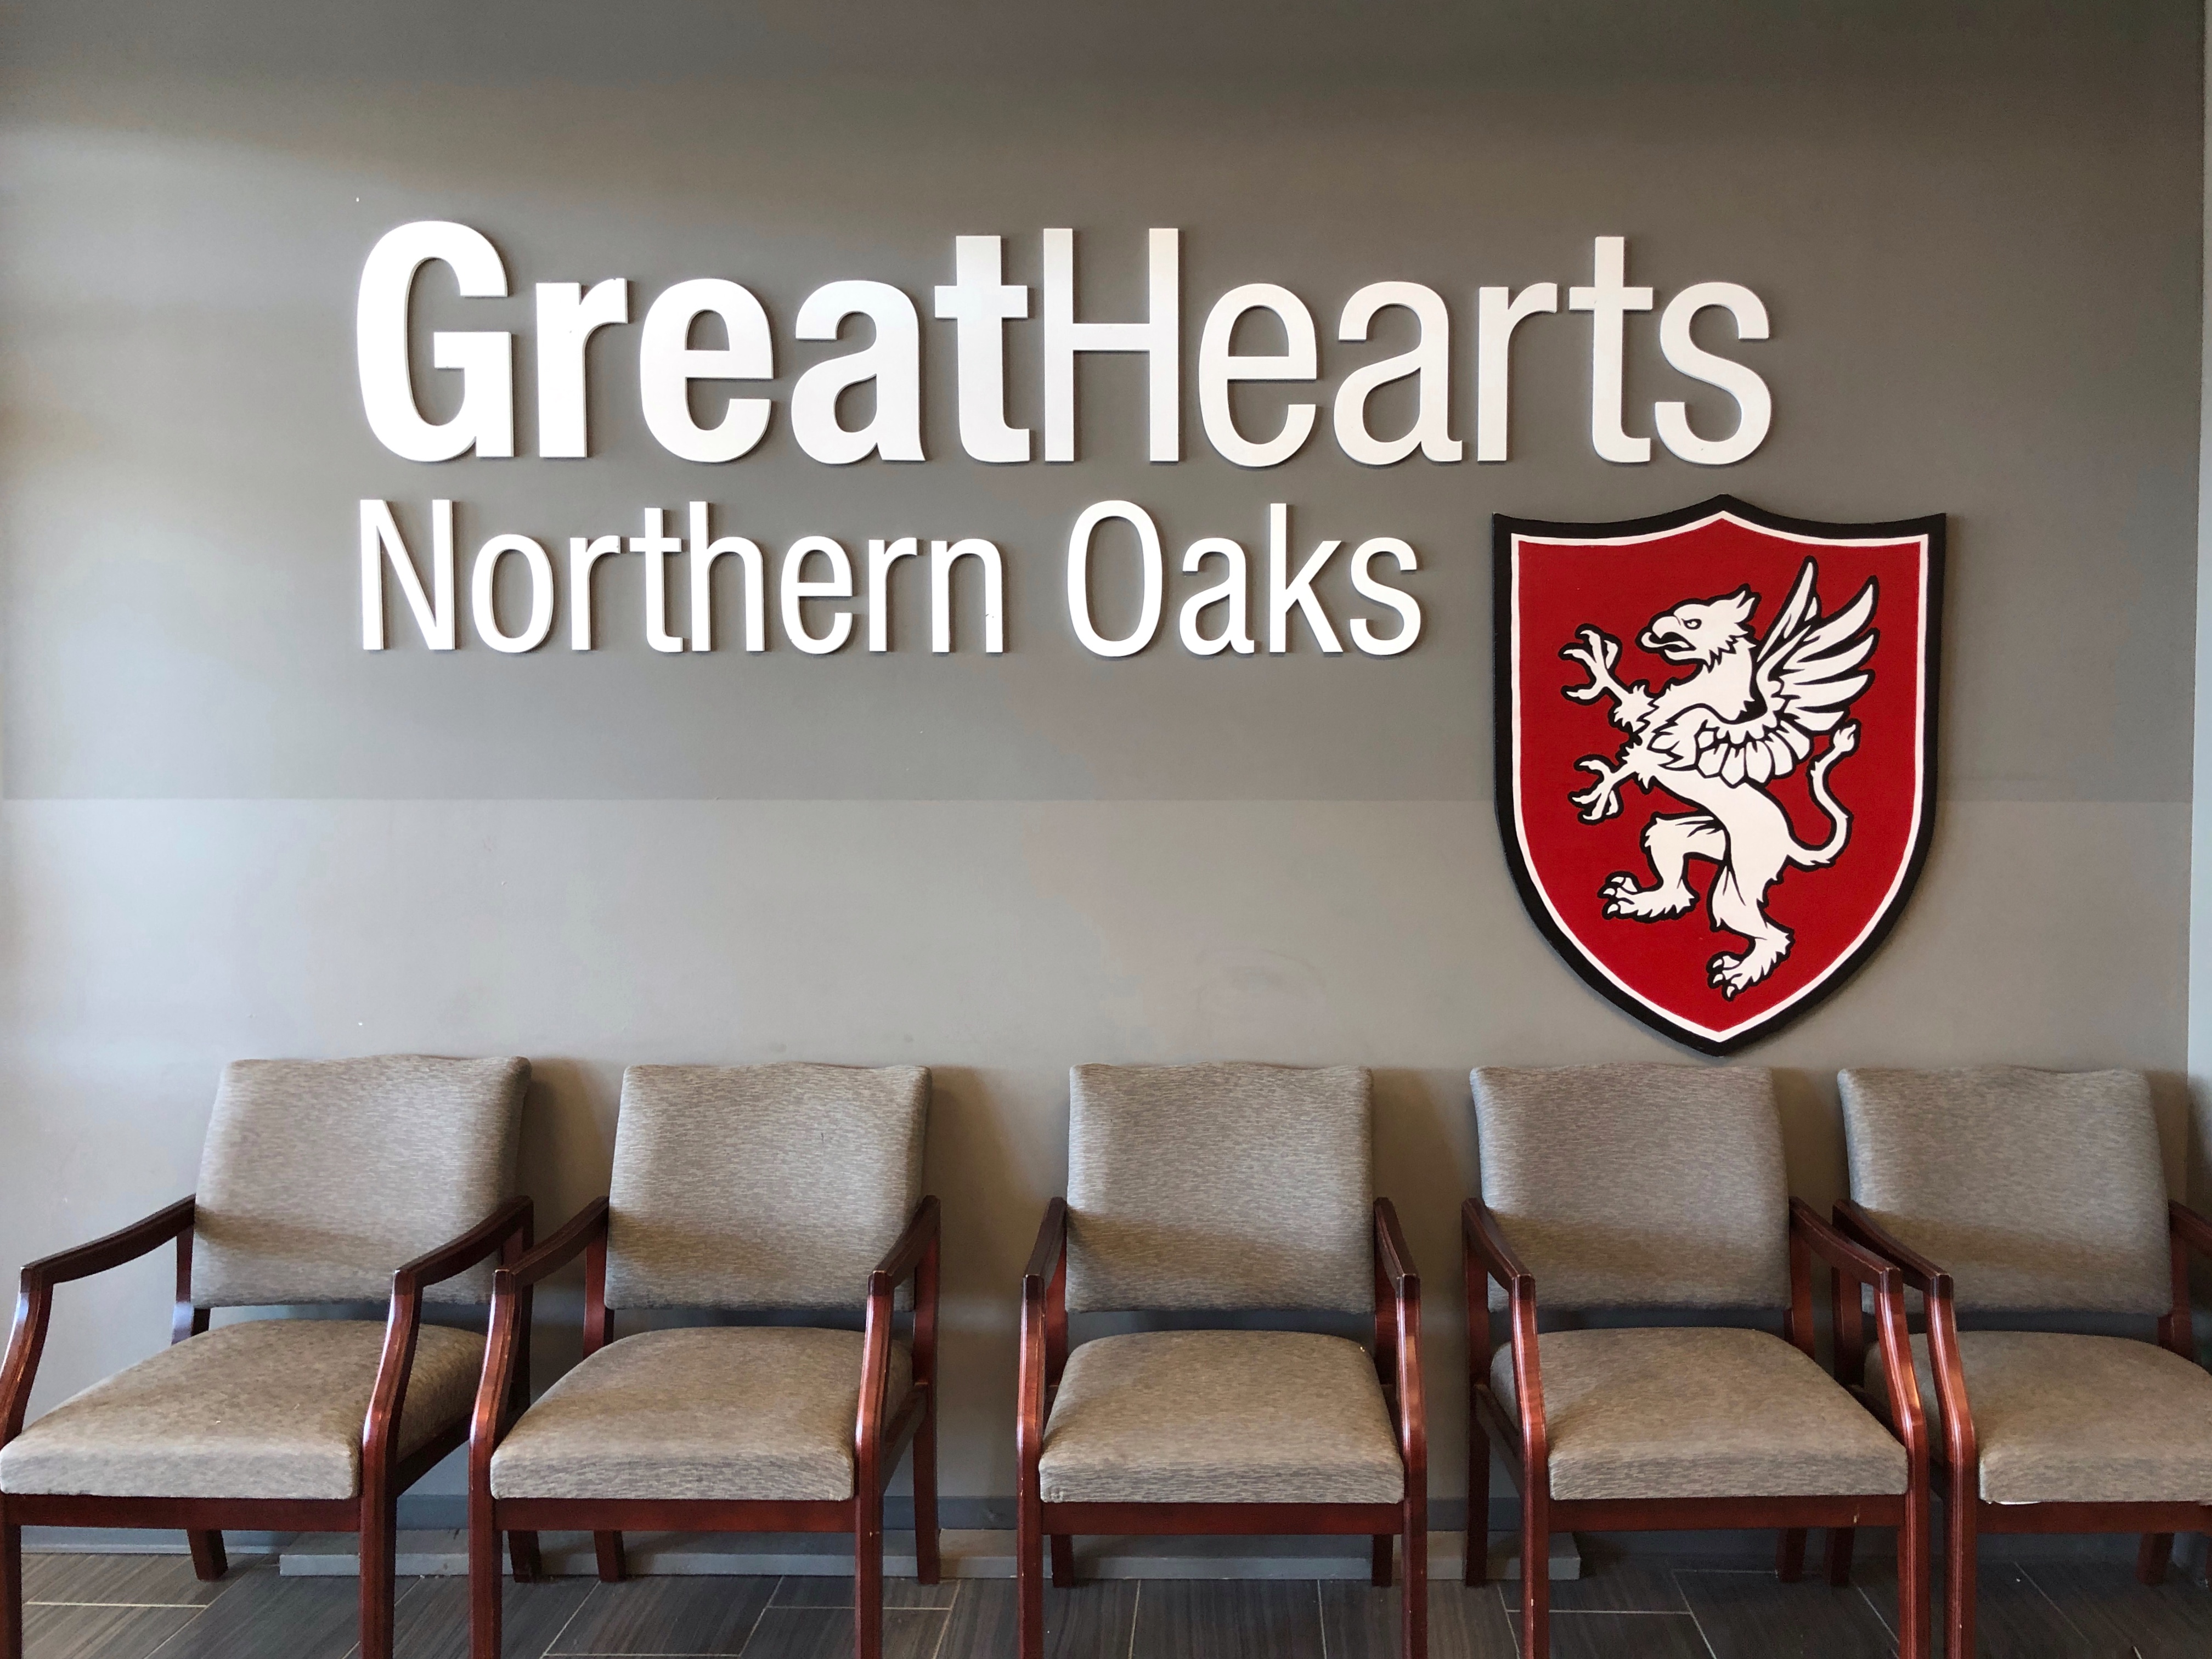 great hearts northern oaks logo above school chairs